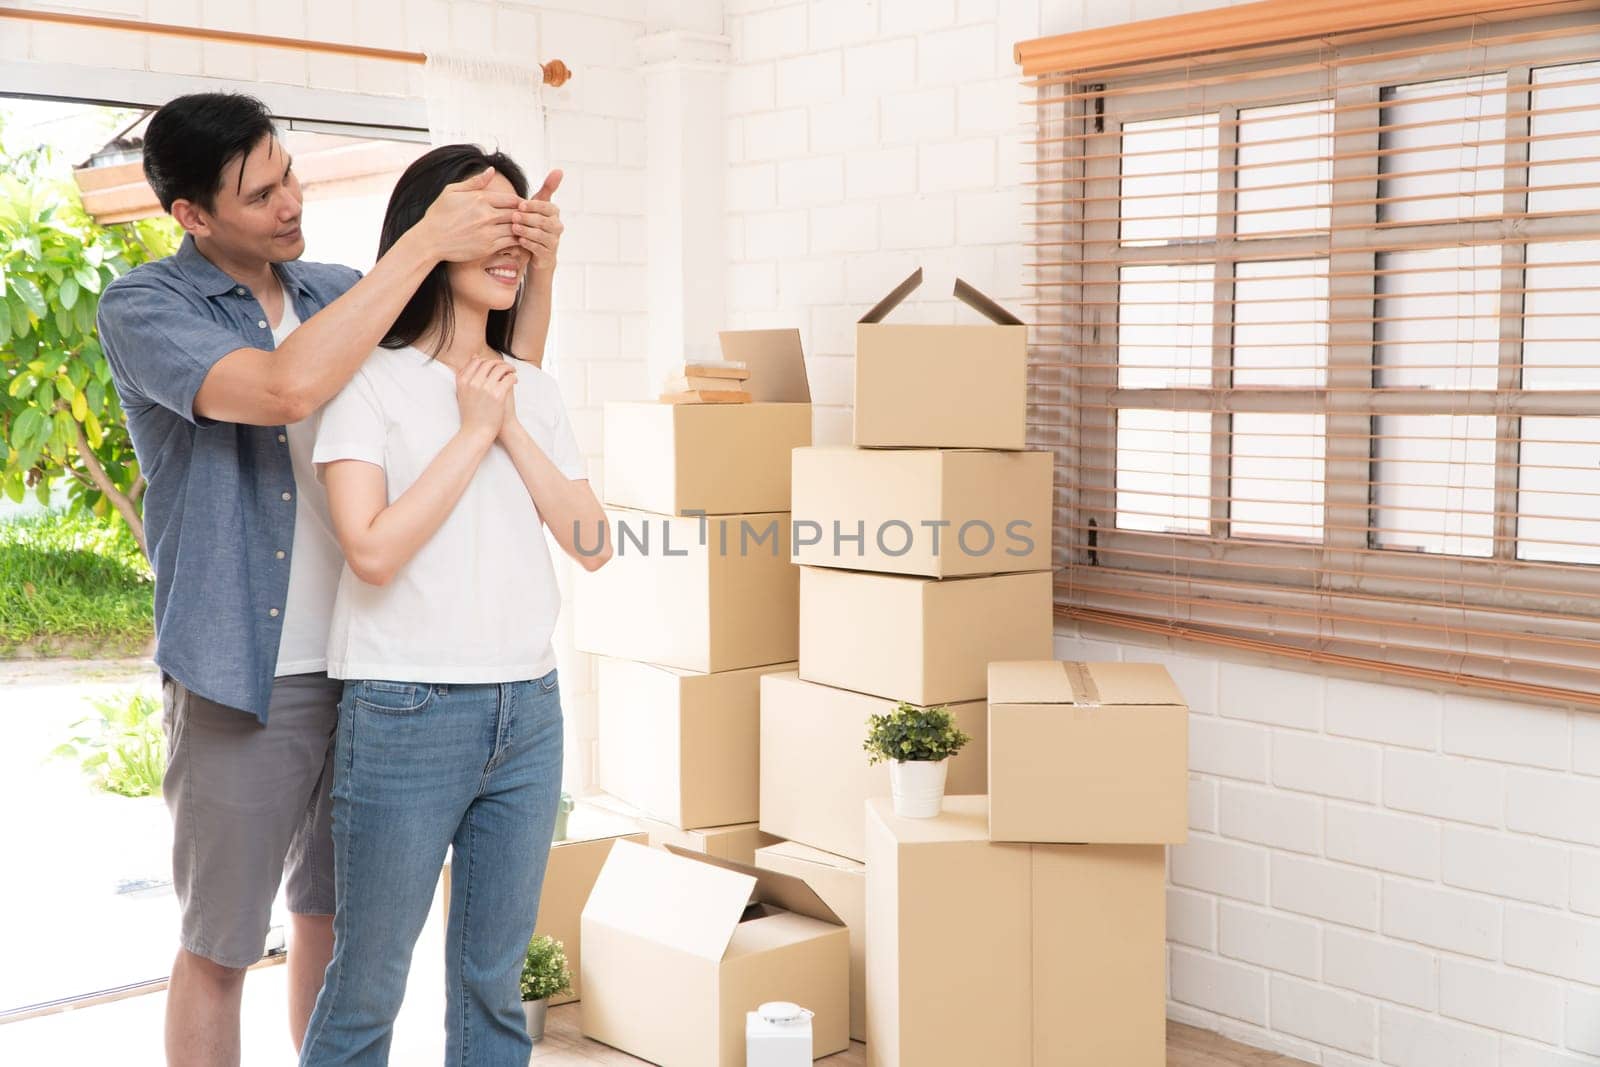 Smiling young Asian happy couple close girlfriend eyes for a surprise at moving day in their new home after buying real estate. Concept of starting a new life for a newly married couple.